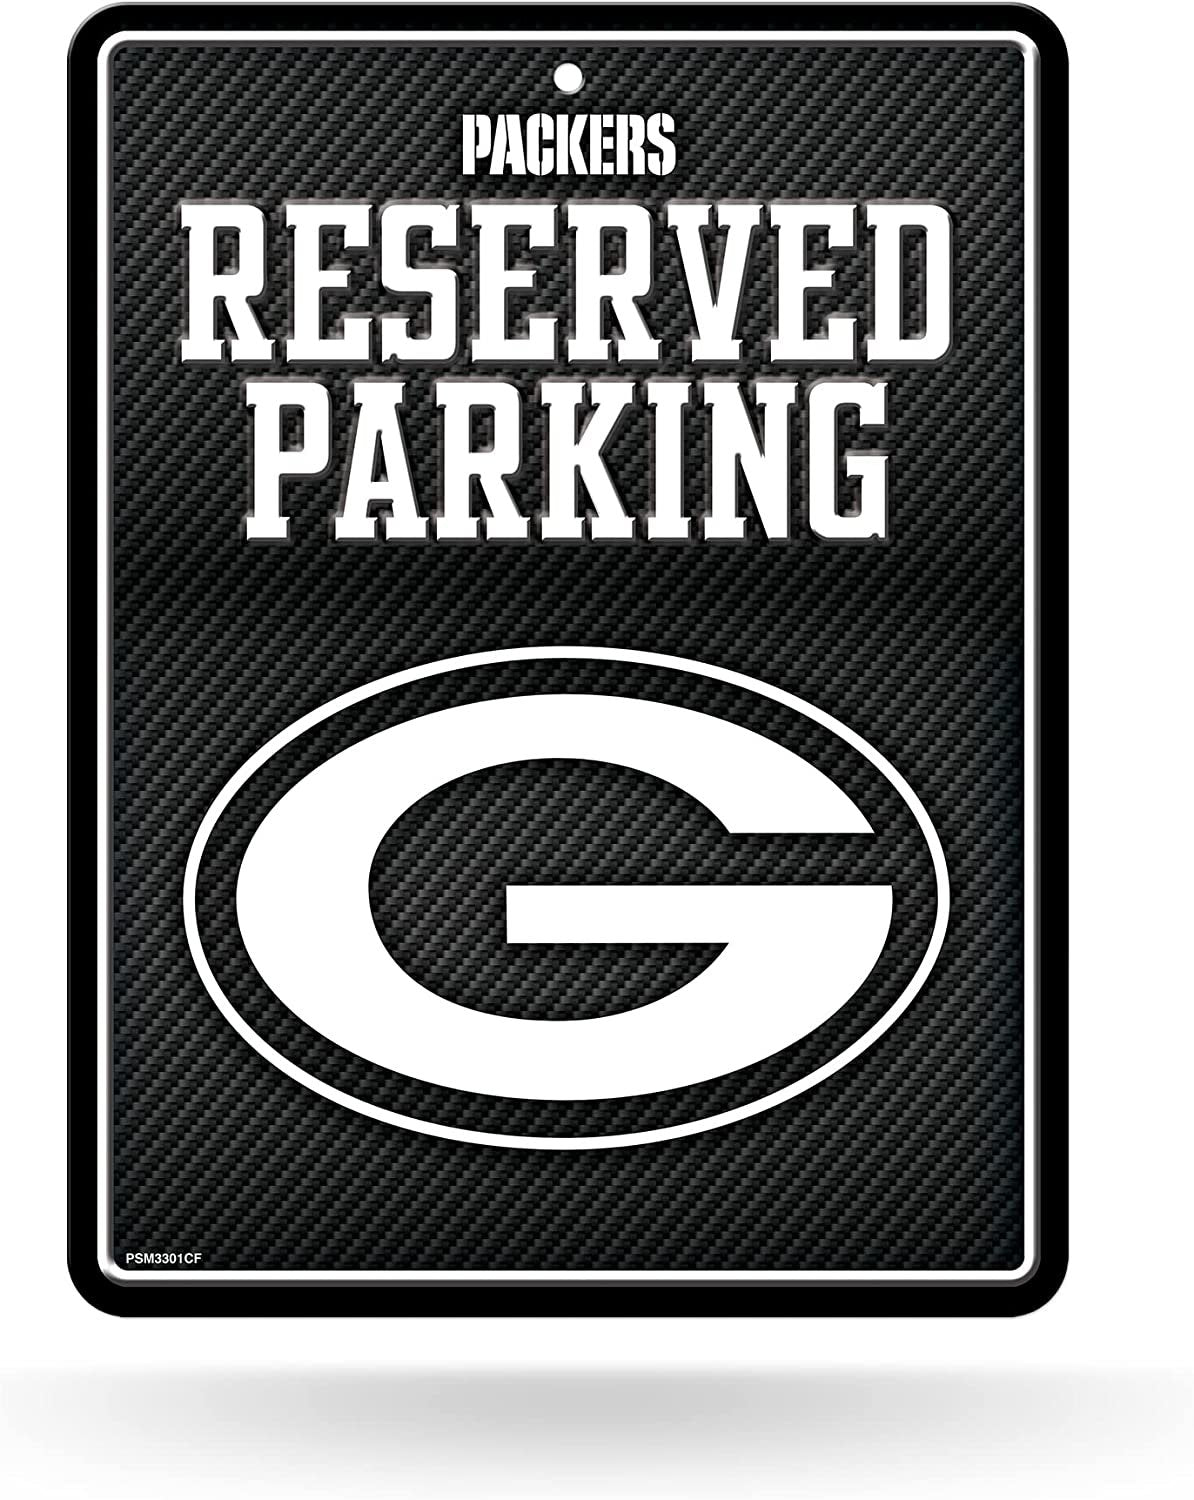 Green Bay Packers Metal Parking Novelty Wall Sign 8.5 x 11 Inch Carbon Fiber Design